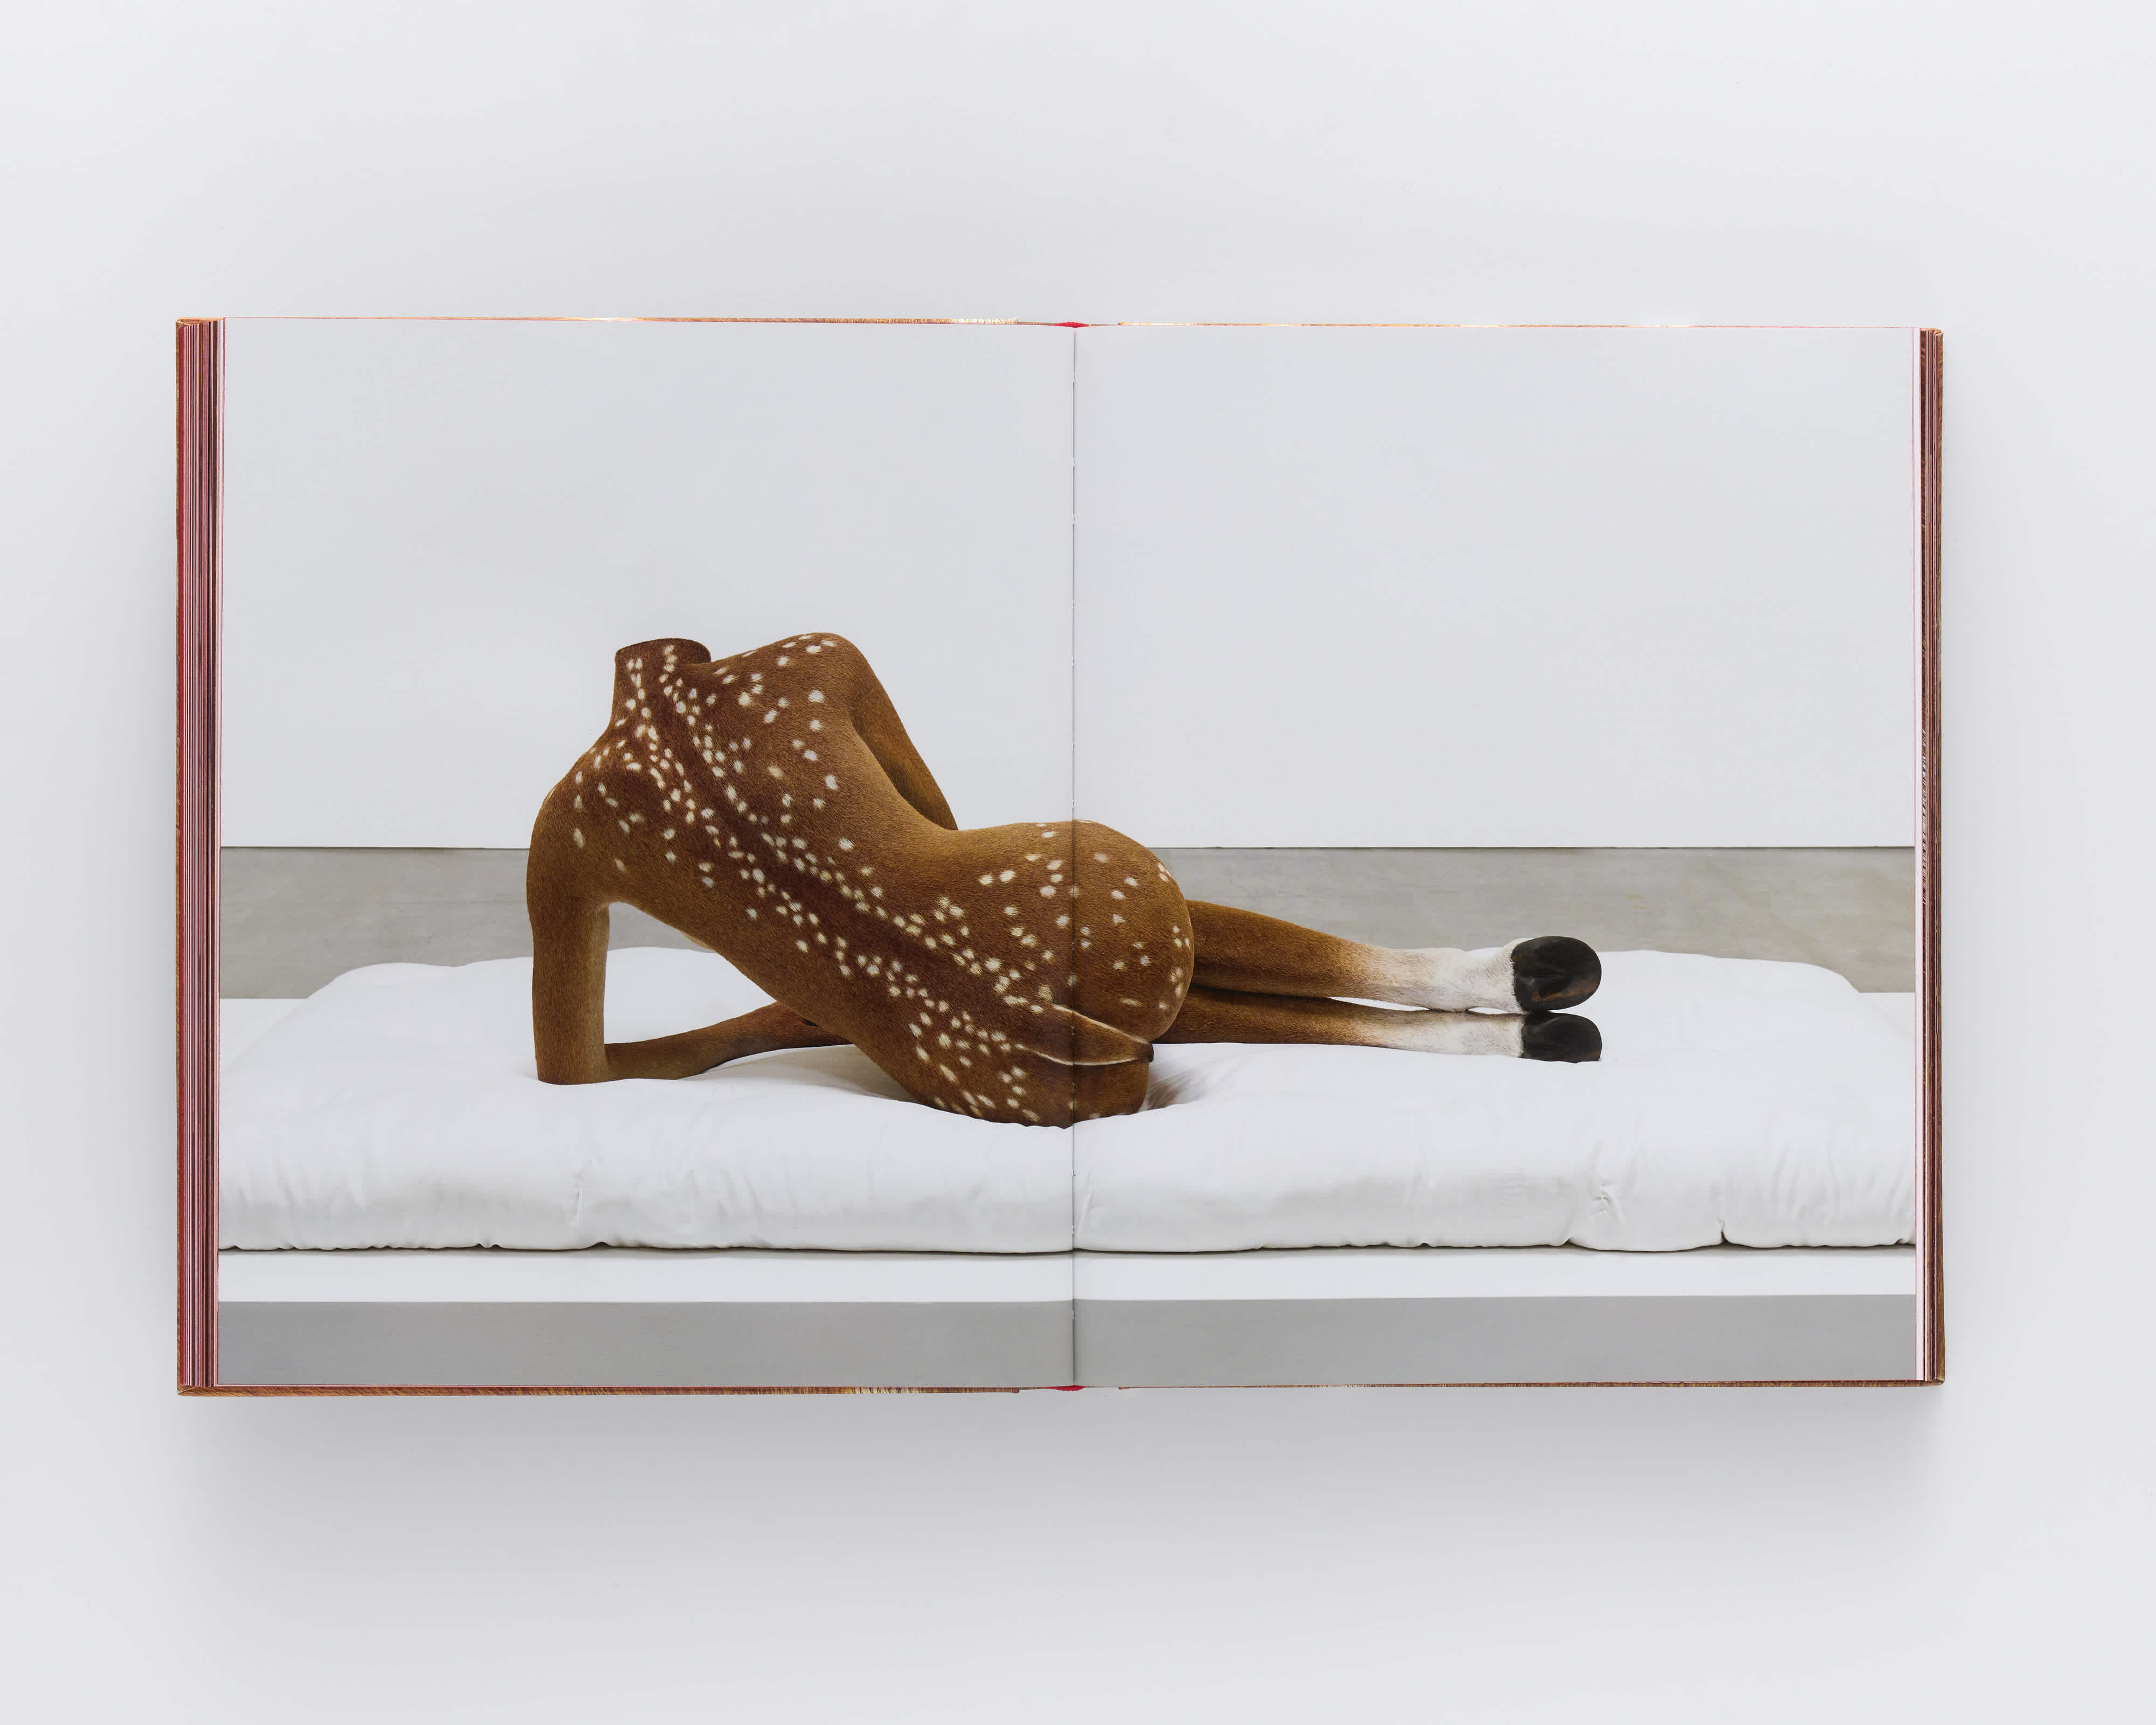 Open book with full-bleed centerfold image of a sculpture of a headless woman. It lays on top of a white cushion, facing away from the viewer. Instead of skin the sculpture is covered in a speckled-fawn's coat of fur. Instead of feet, the sculpture has hooves.